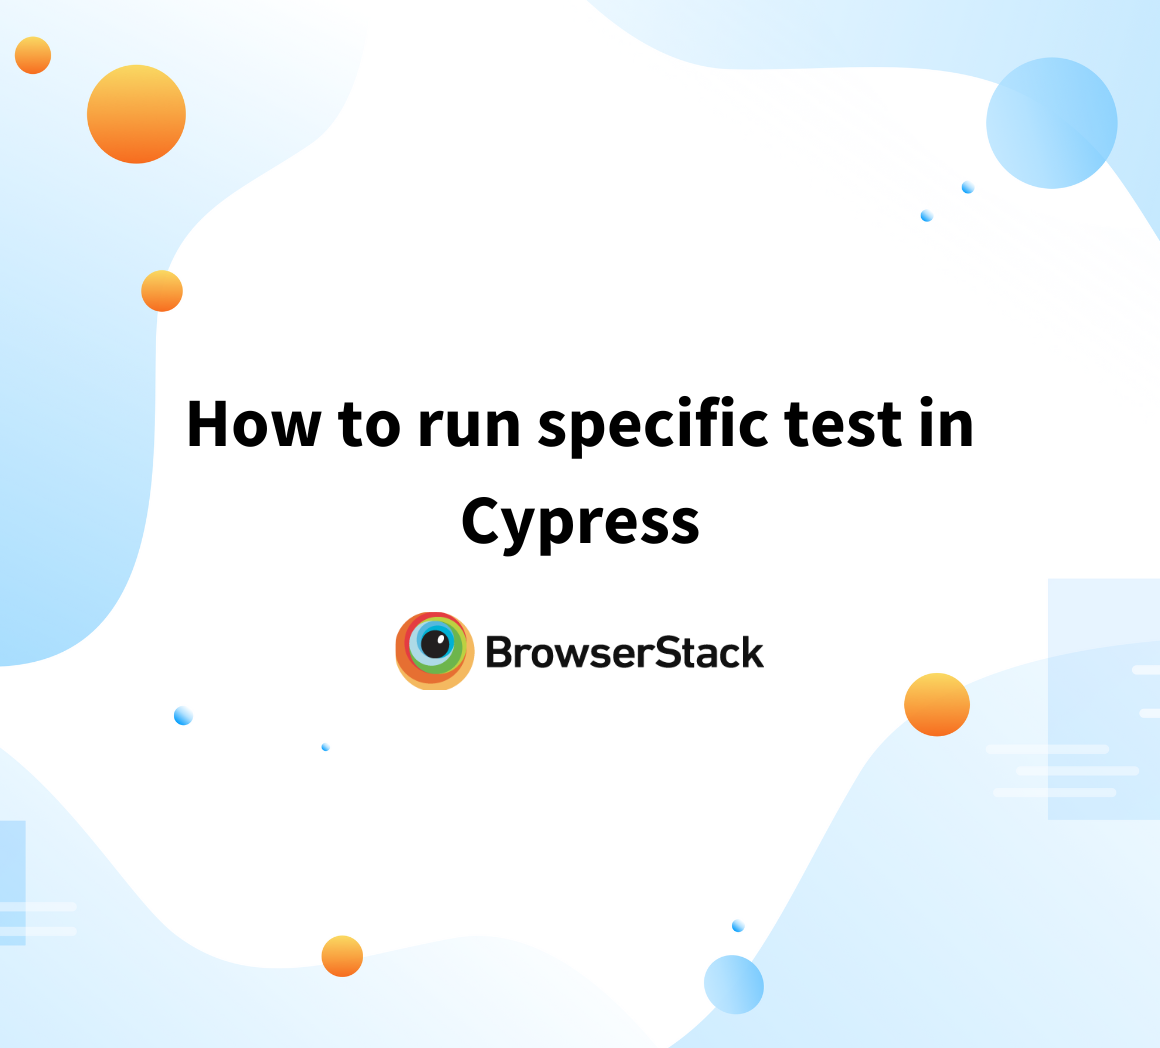 How to run specific test in Cypress